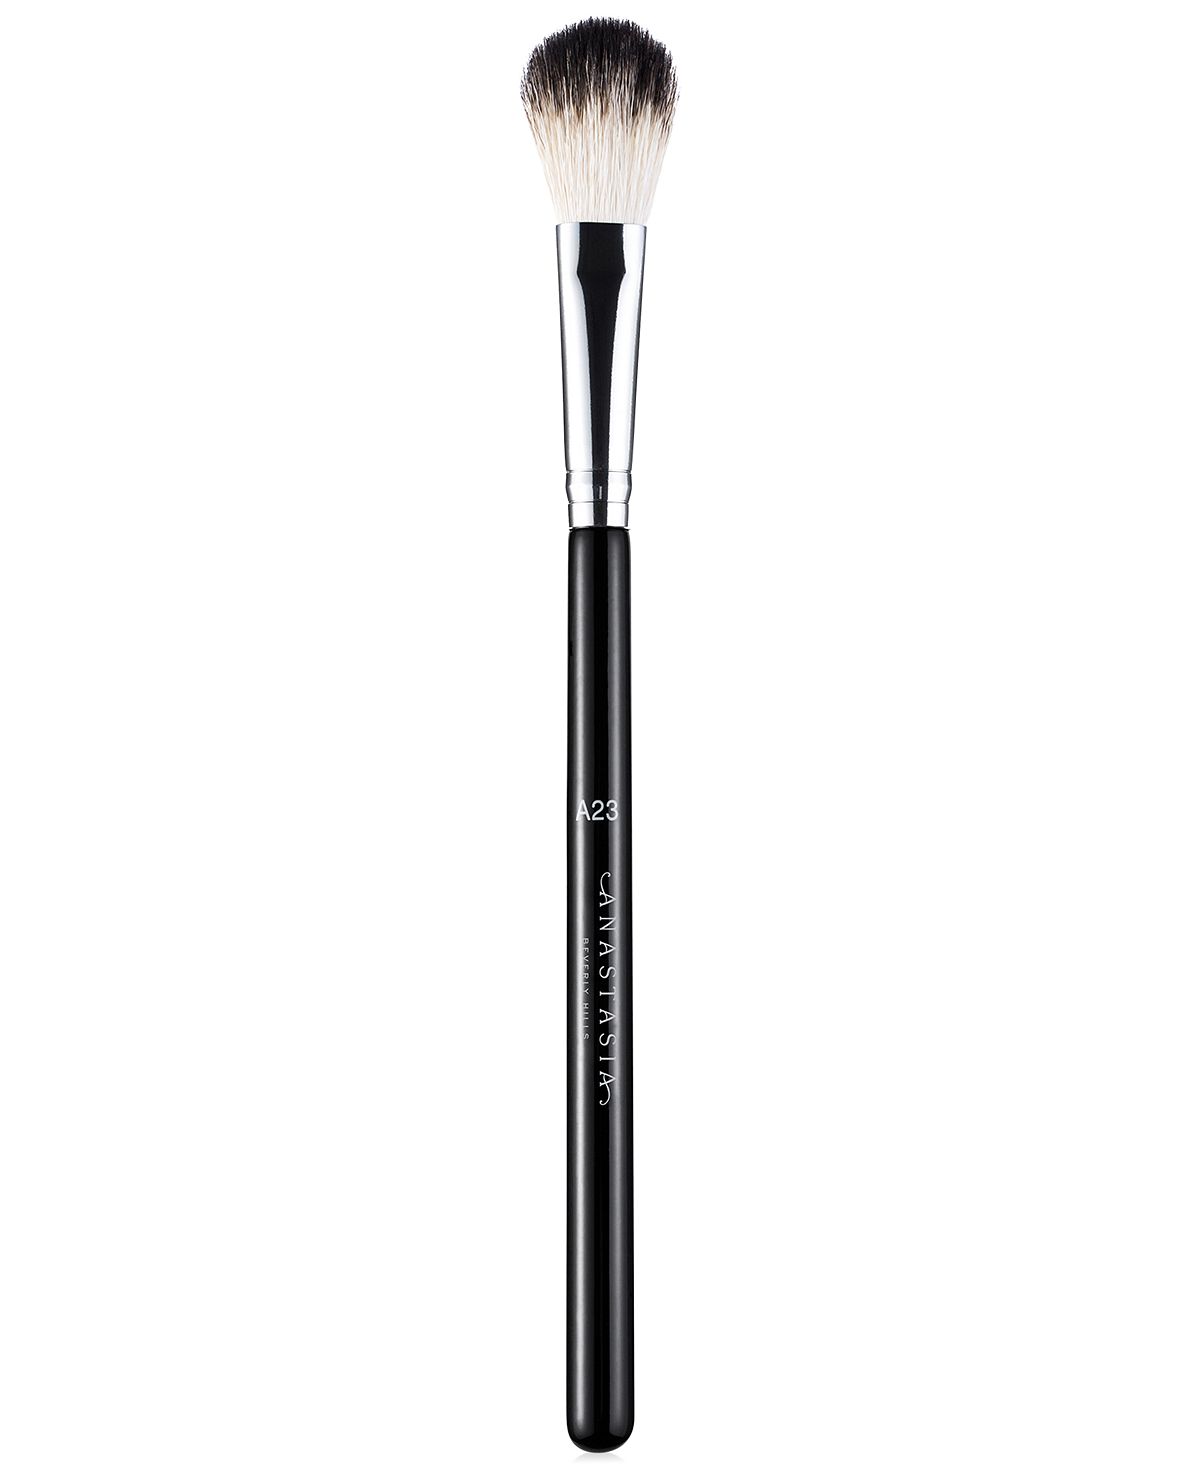 Anastasia Beverly Hills - Brush #23 - A Macy's Exclusive